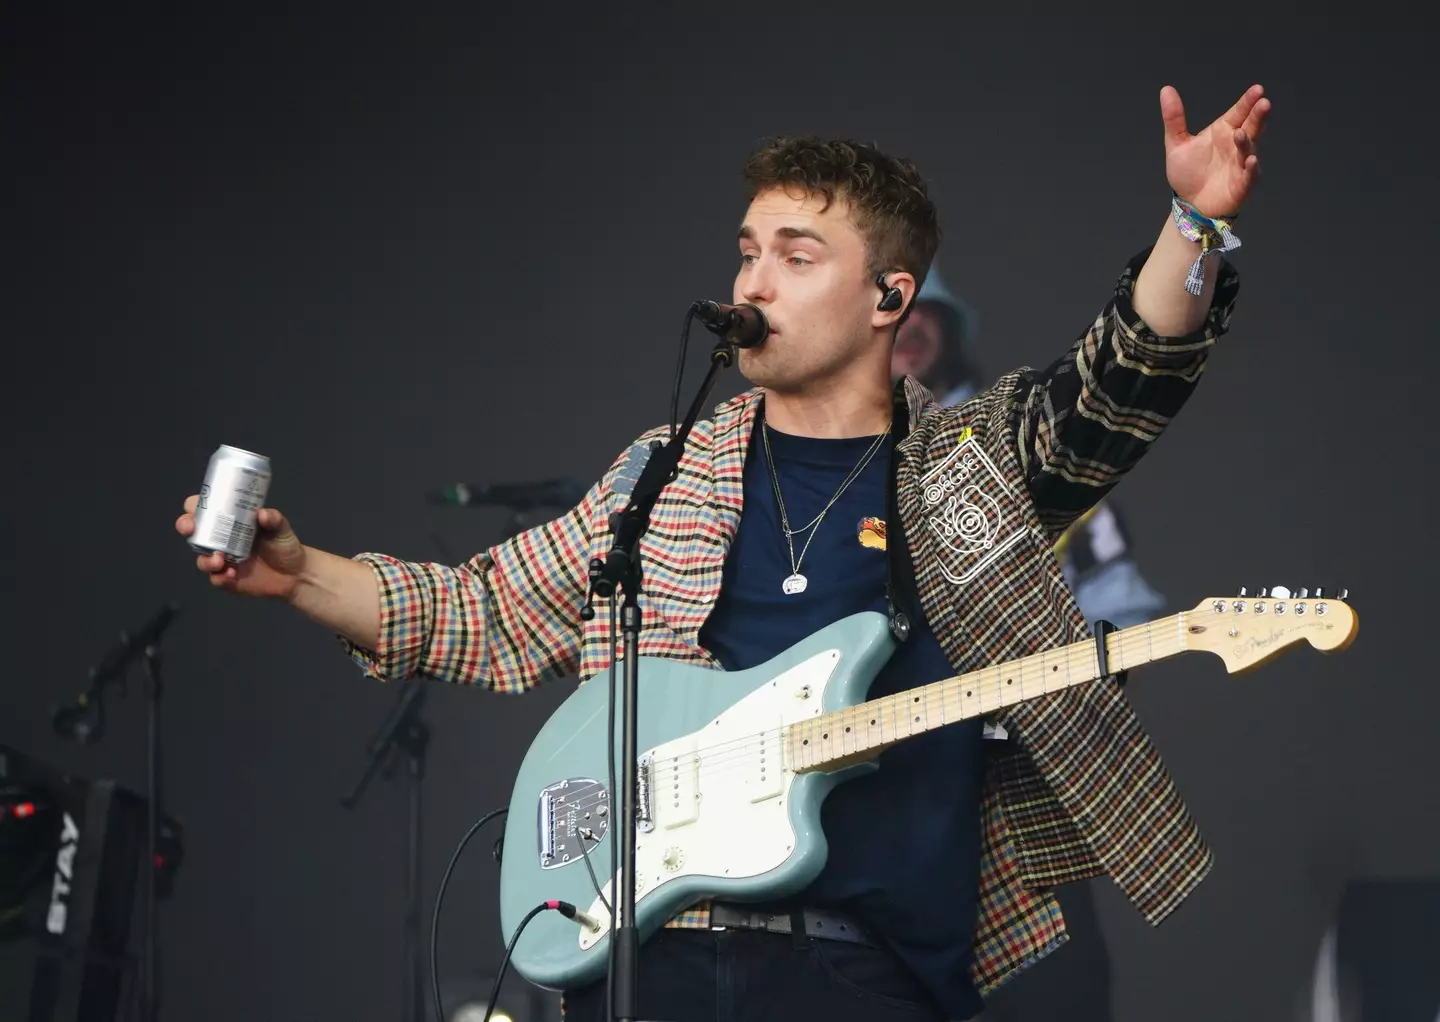 Sam Fender's performance at Glasto was electric (